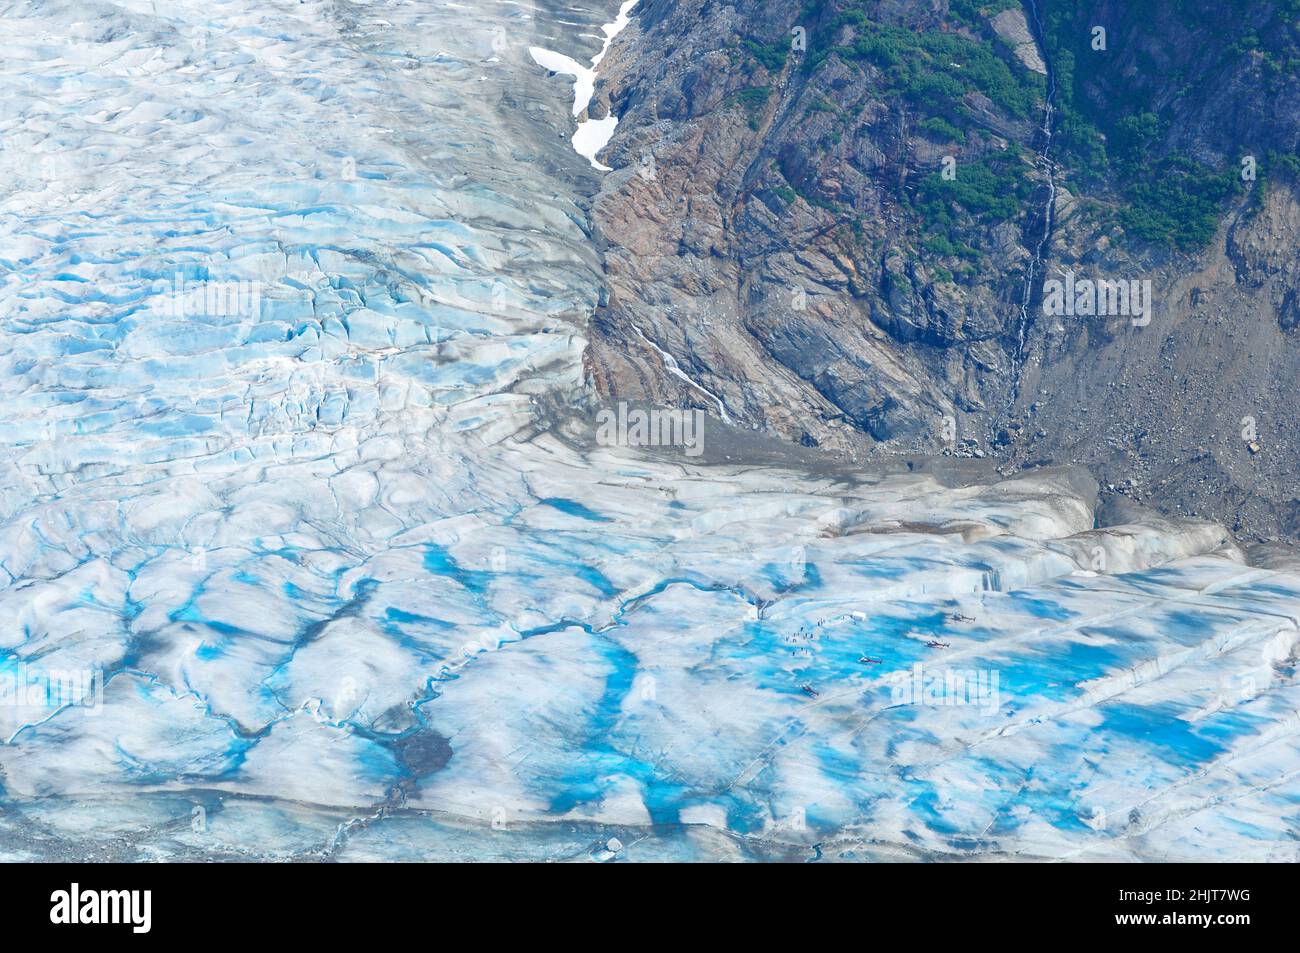 View of Mendenhall glacier in Juneau Icefield, Alaska Stock Photo